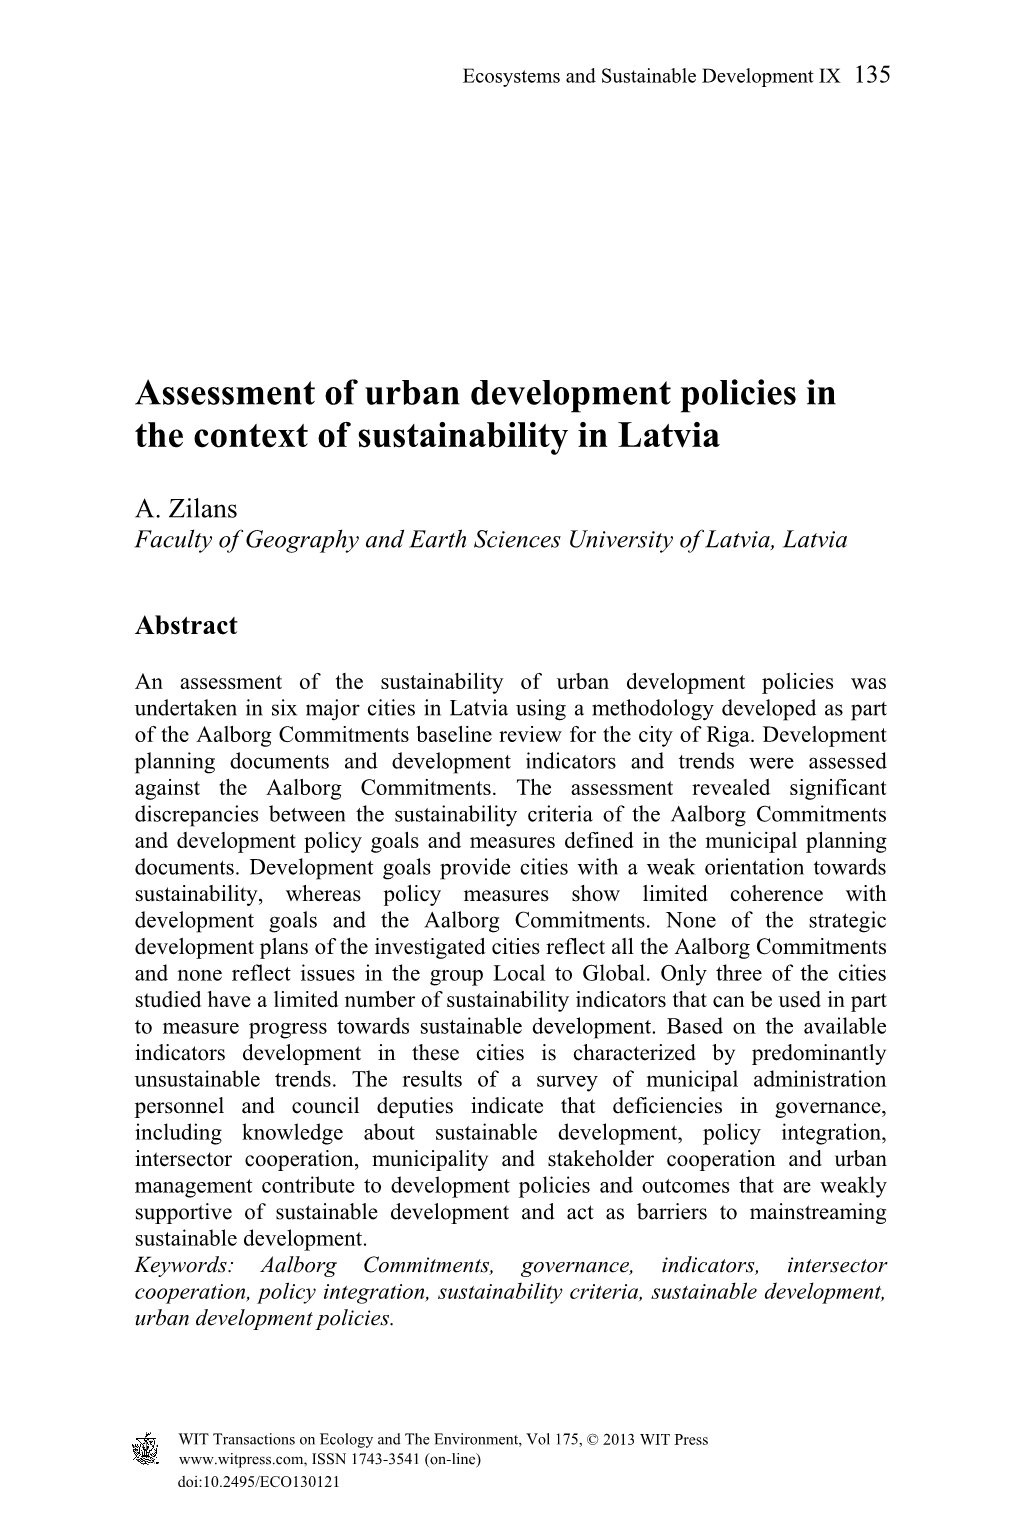 Assessment of Urban Development Policies in the Context of Sustainability in Latvia